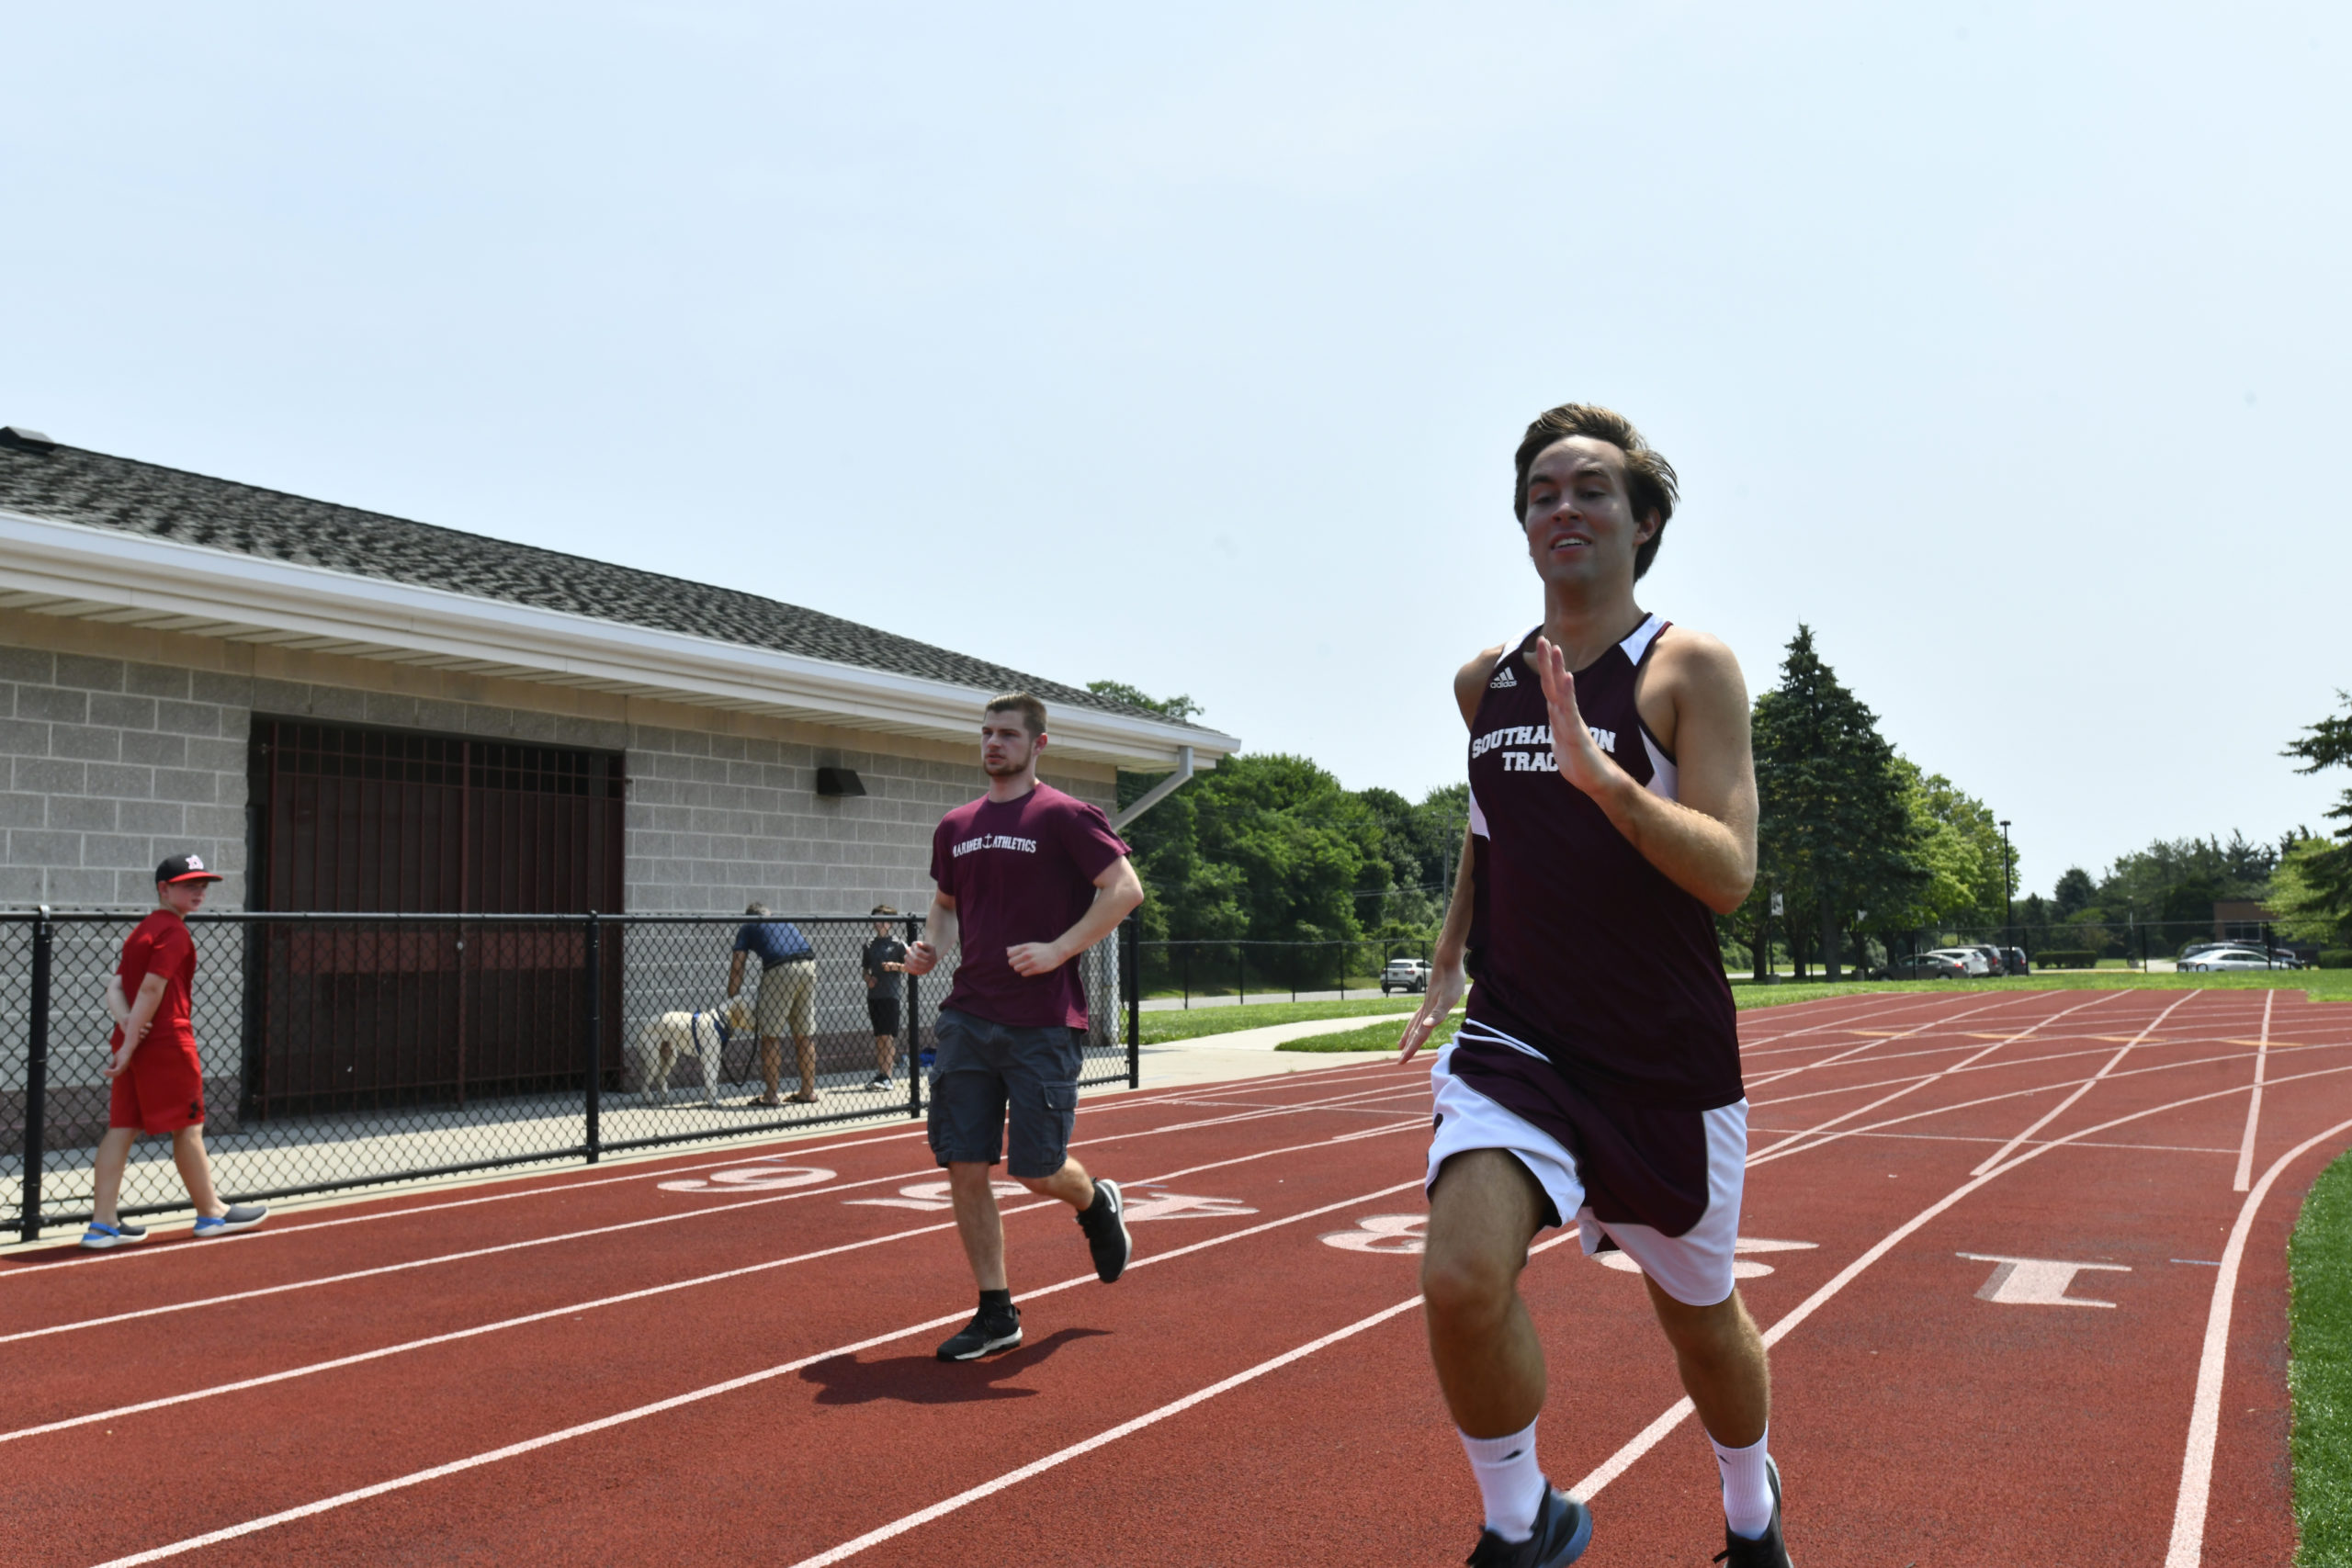 Southampton residents Ross Ebrus, left, and William Segarra will represent Team New York at the Special Olympics USA Games, in track and field, next June in Orlando, Florida. They were chosen based on their performances at the 2019 State Games. Segarra competes in the long jump and 1,600-meter race, while Ebrus competes in the shot put and 800-meter race.   DANA SHAW